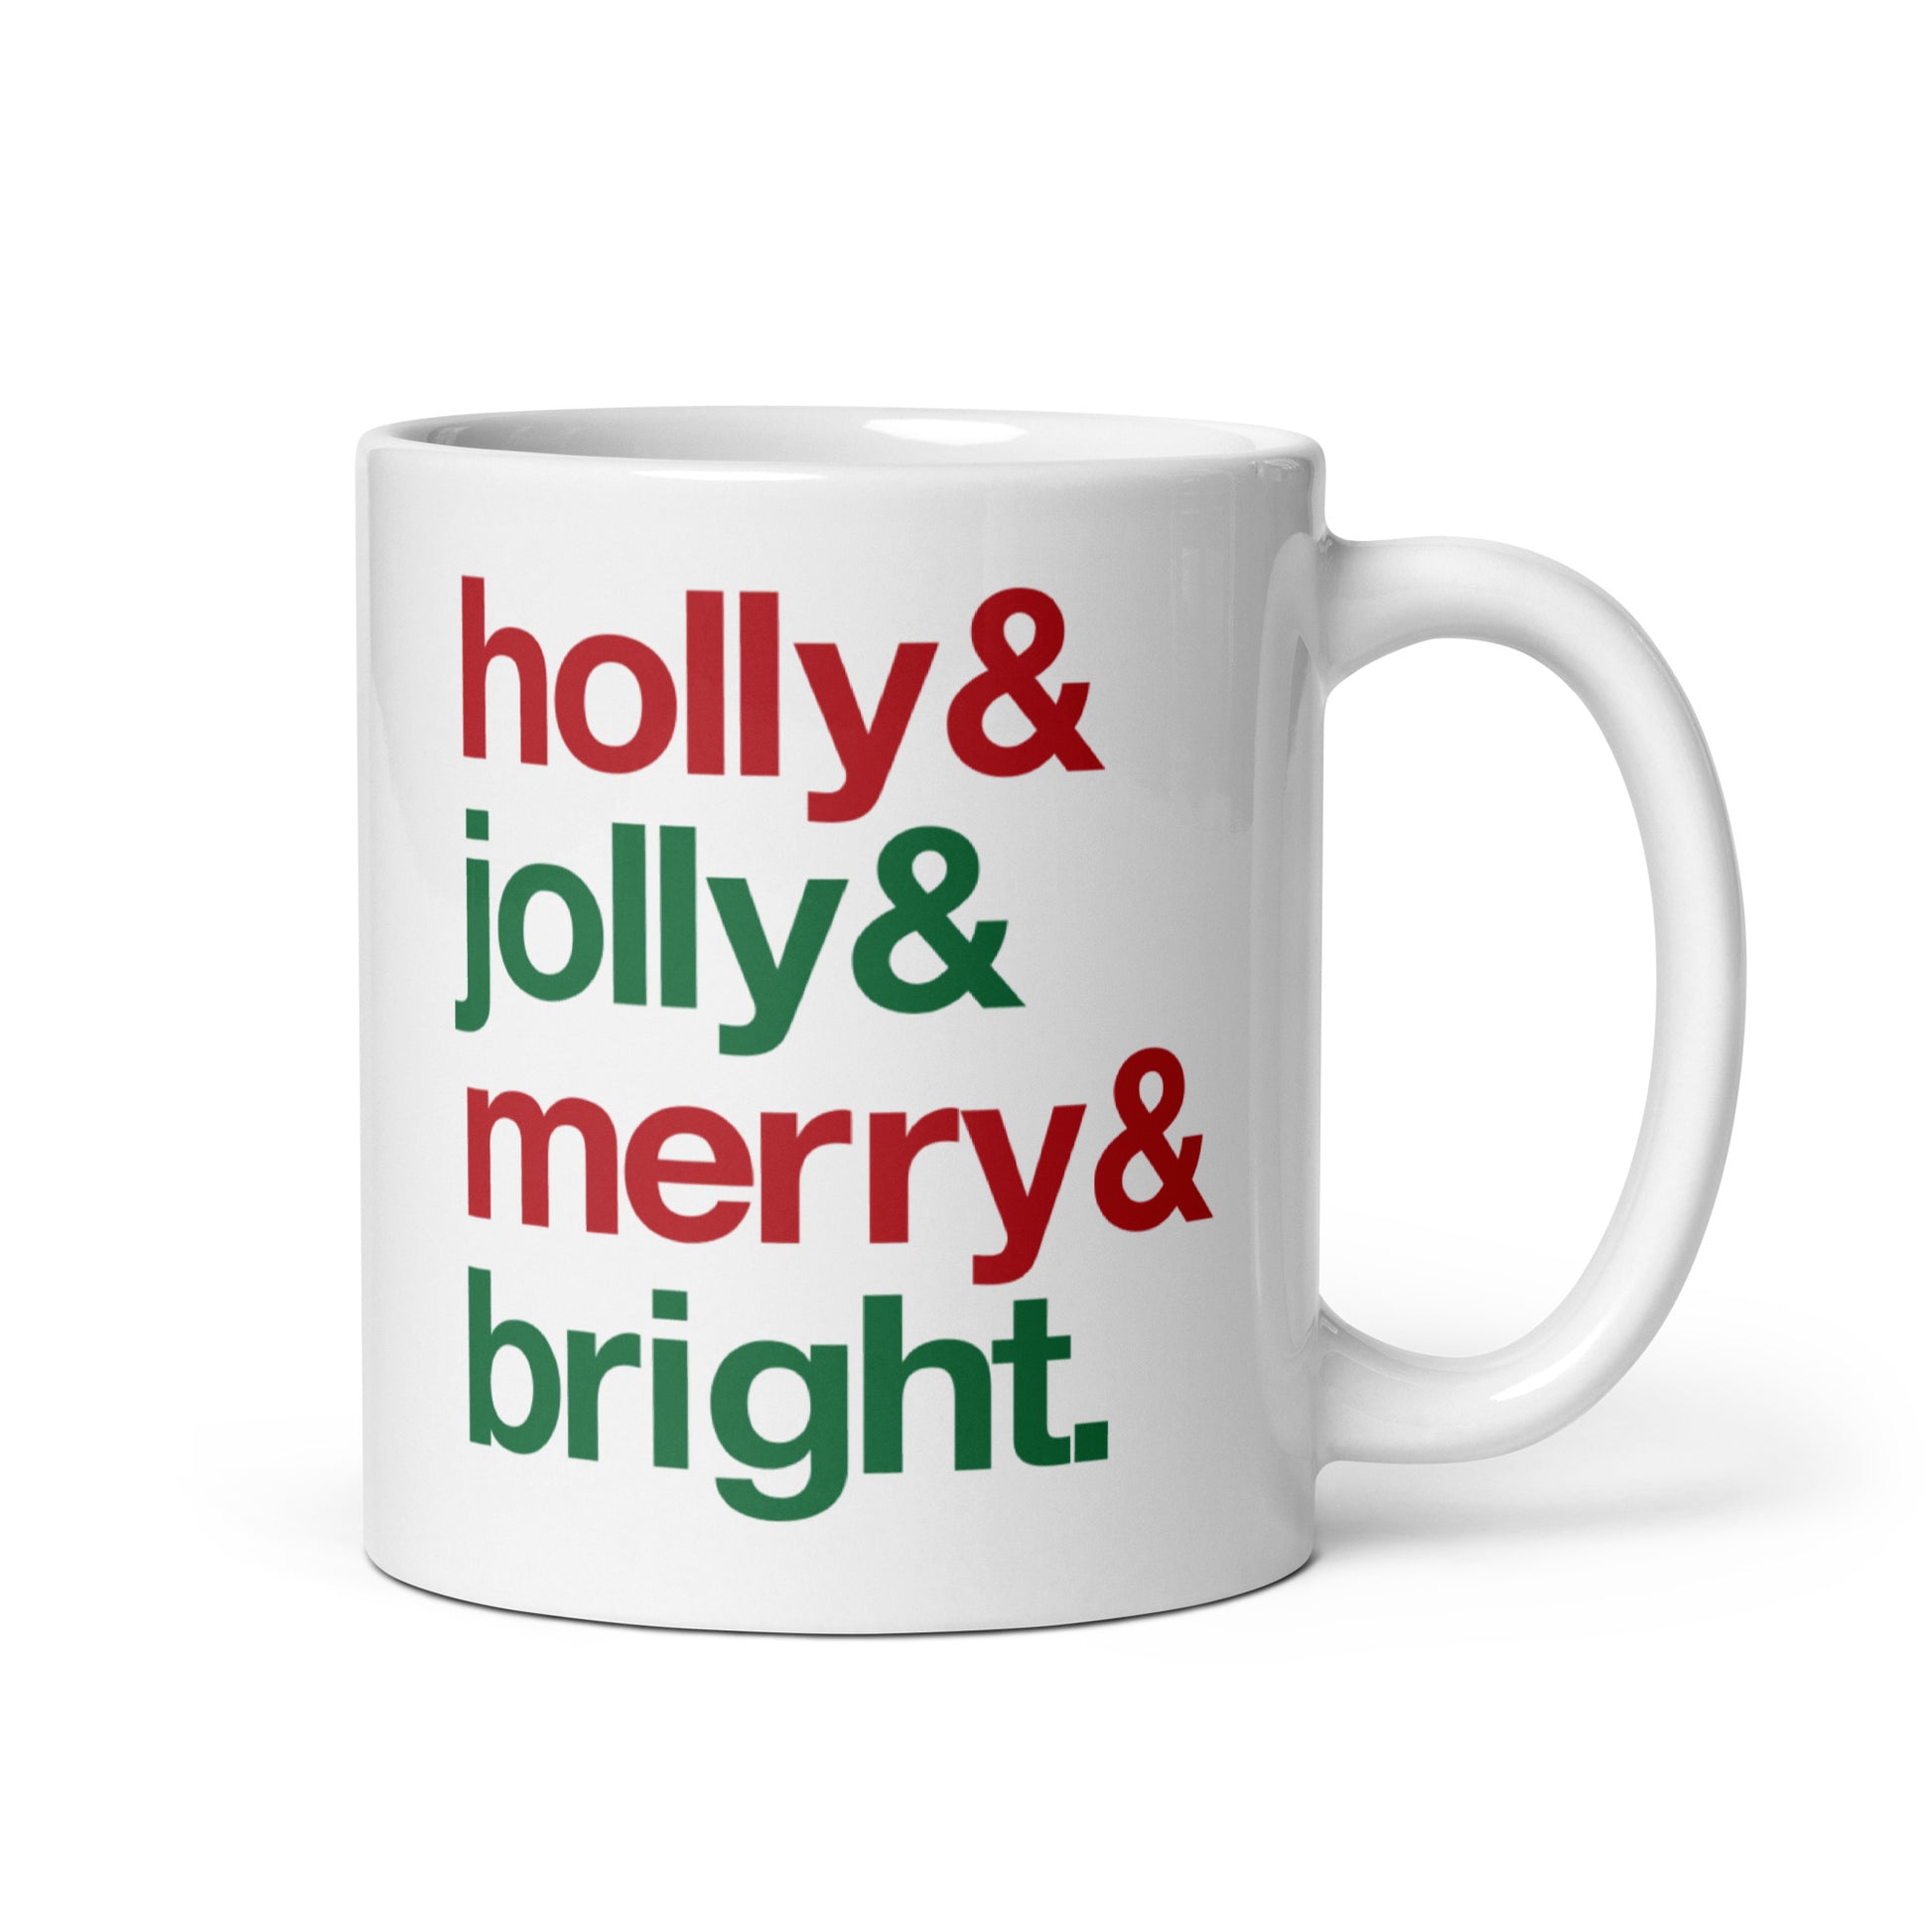 A white 11 ounce ceramic mug with four lines of red and green text that read "Holly & Jolly & Merry & Bright"